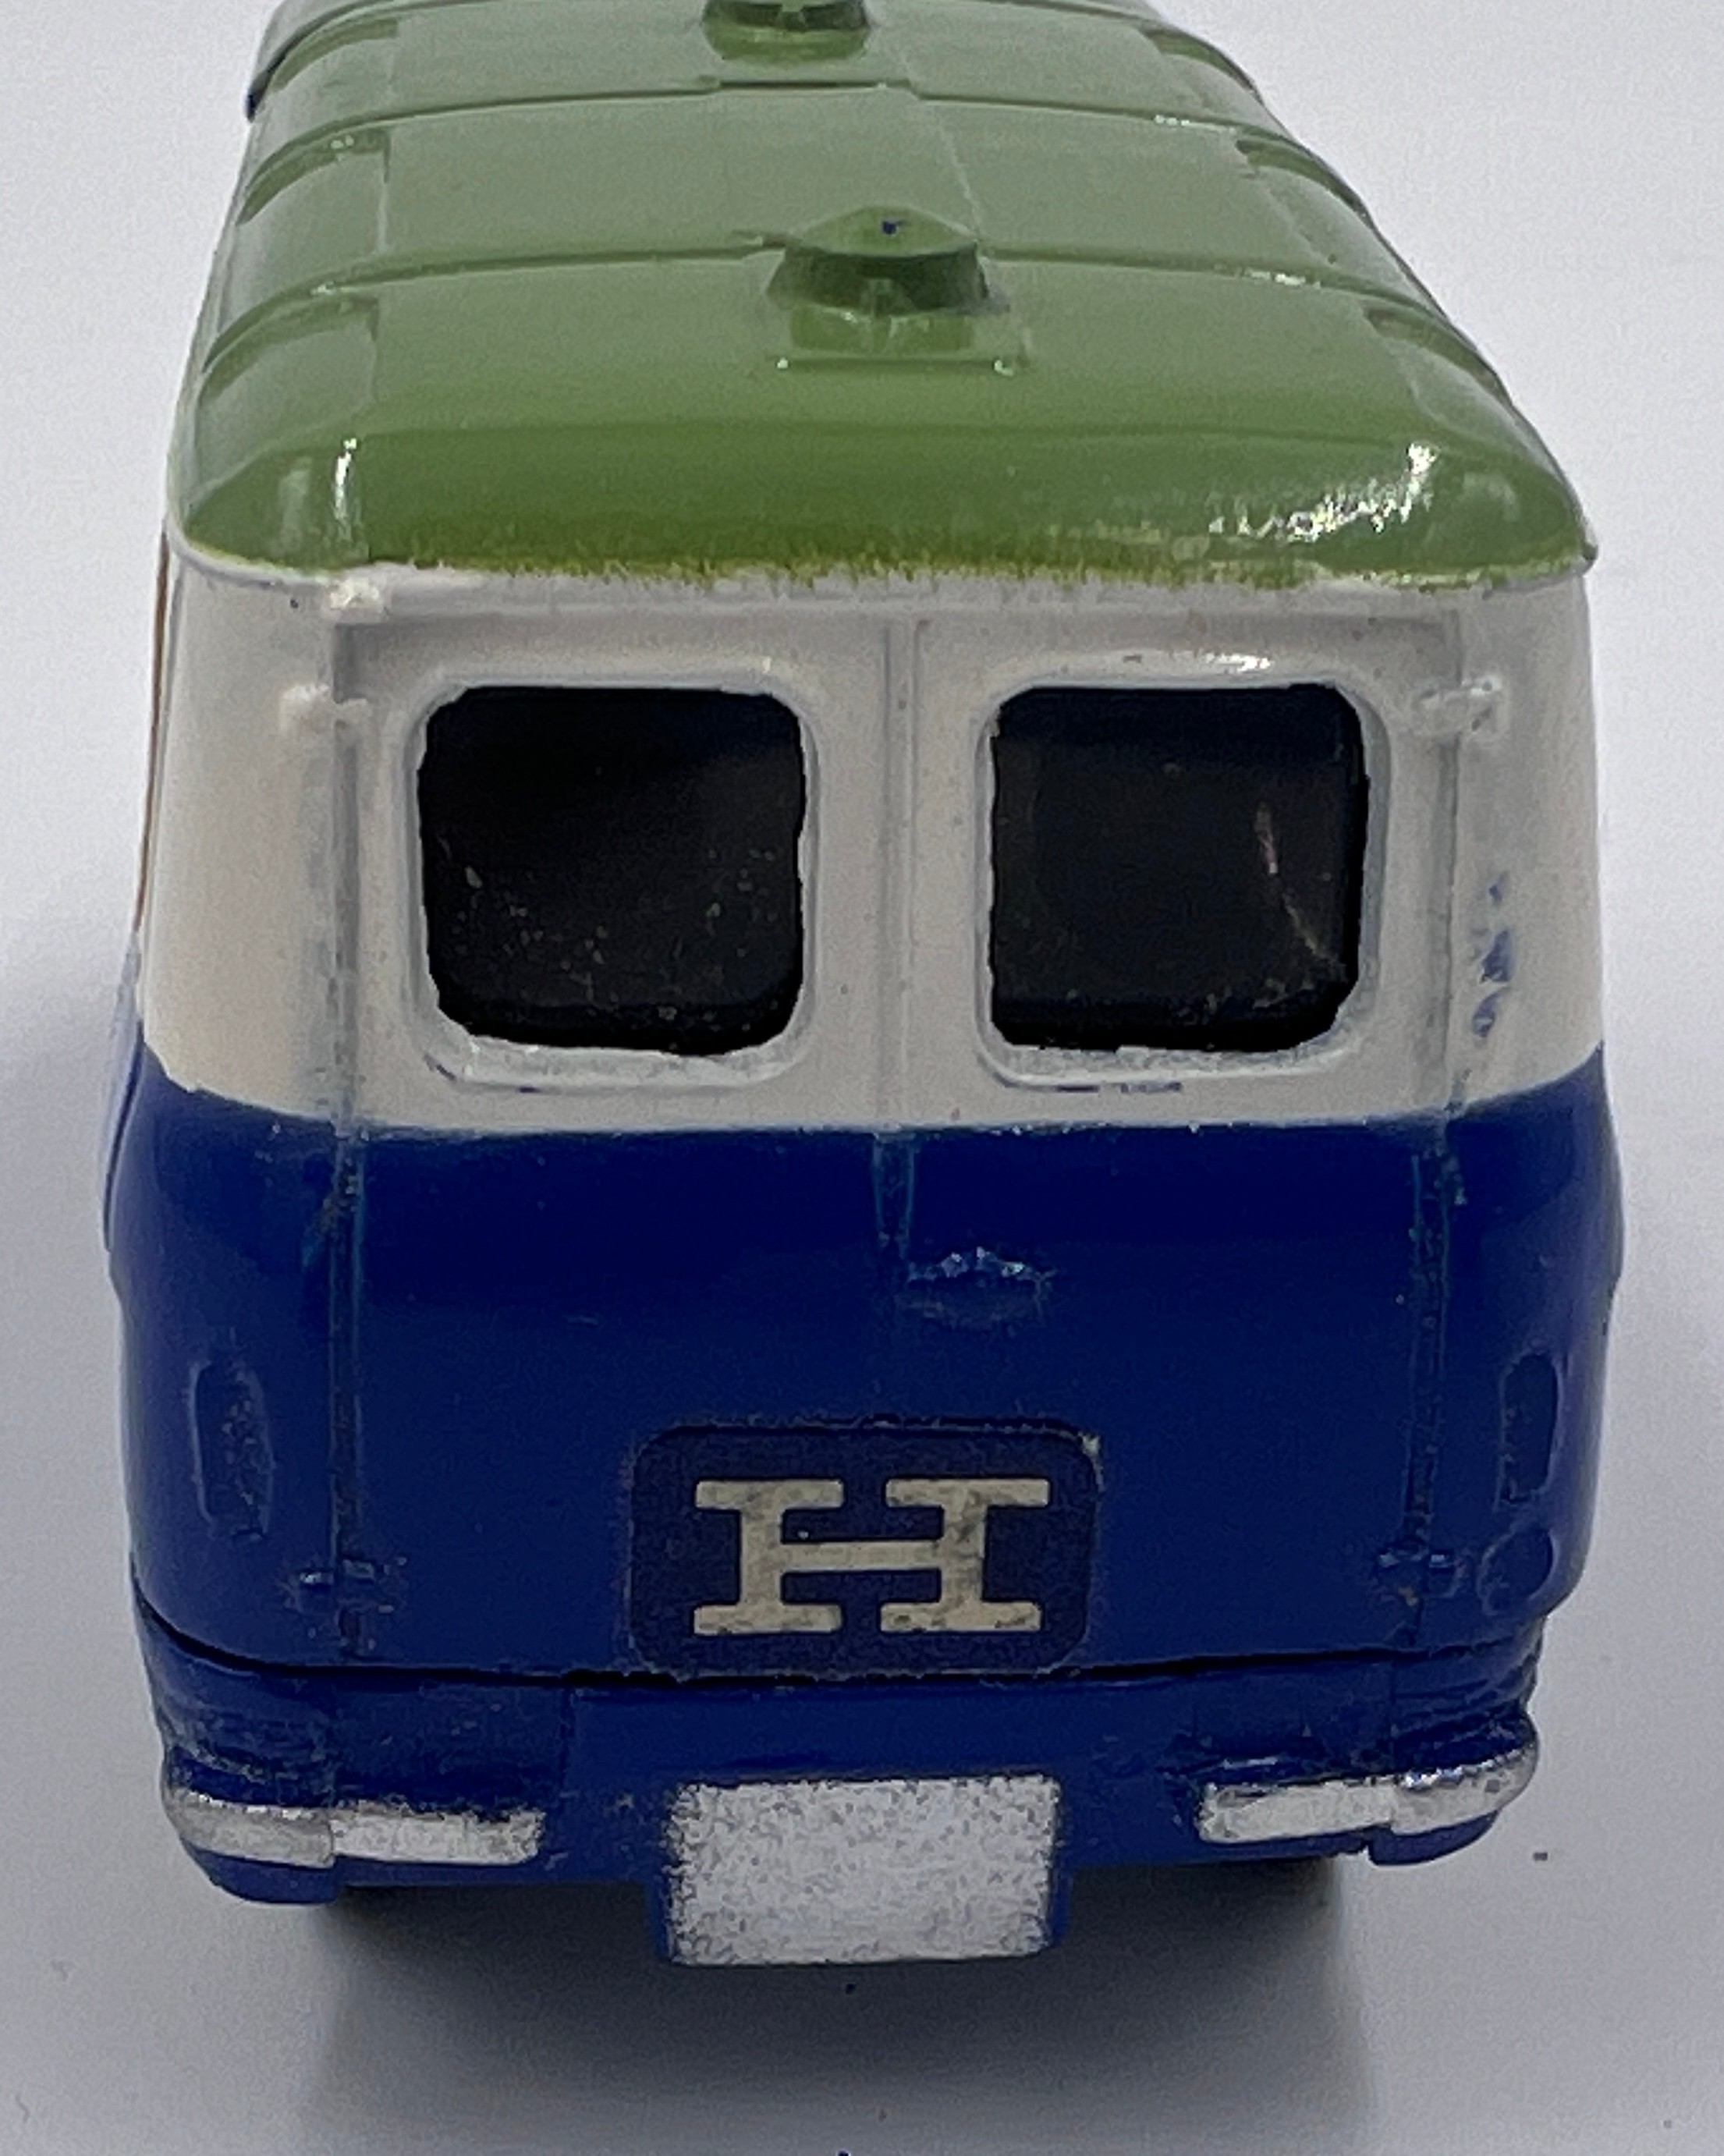 Corgi 462 Commer "Hammonds" Promotional Van in original box - finished in blue with a green roof, - Bild 10 aus 11